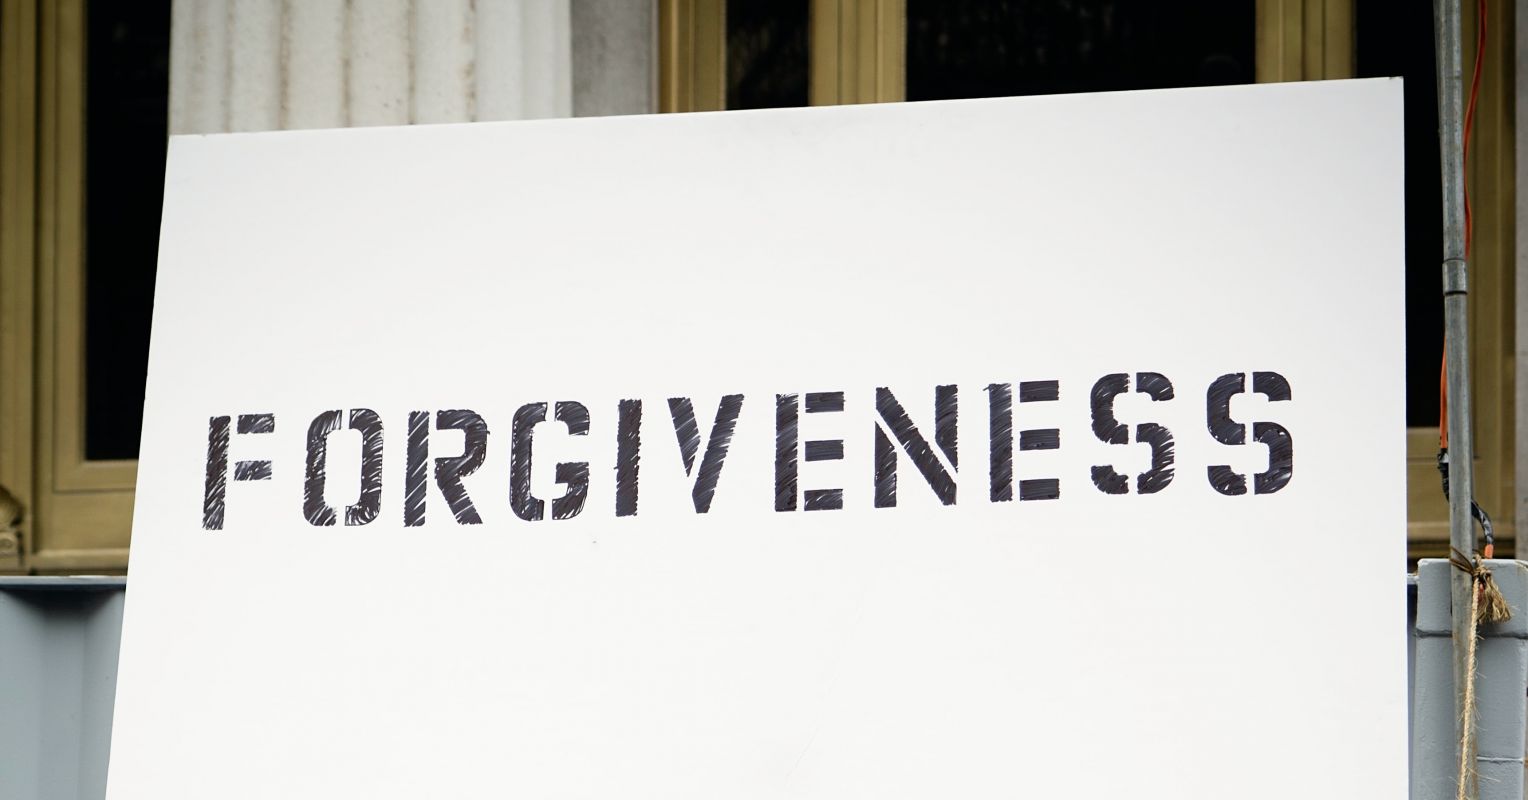 How to Forgive Yourself: Tips for Self-Forgiveness